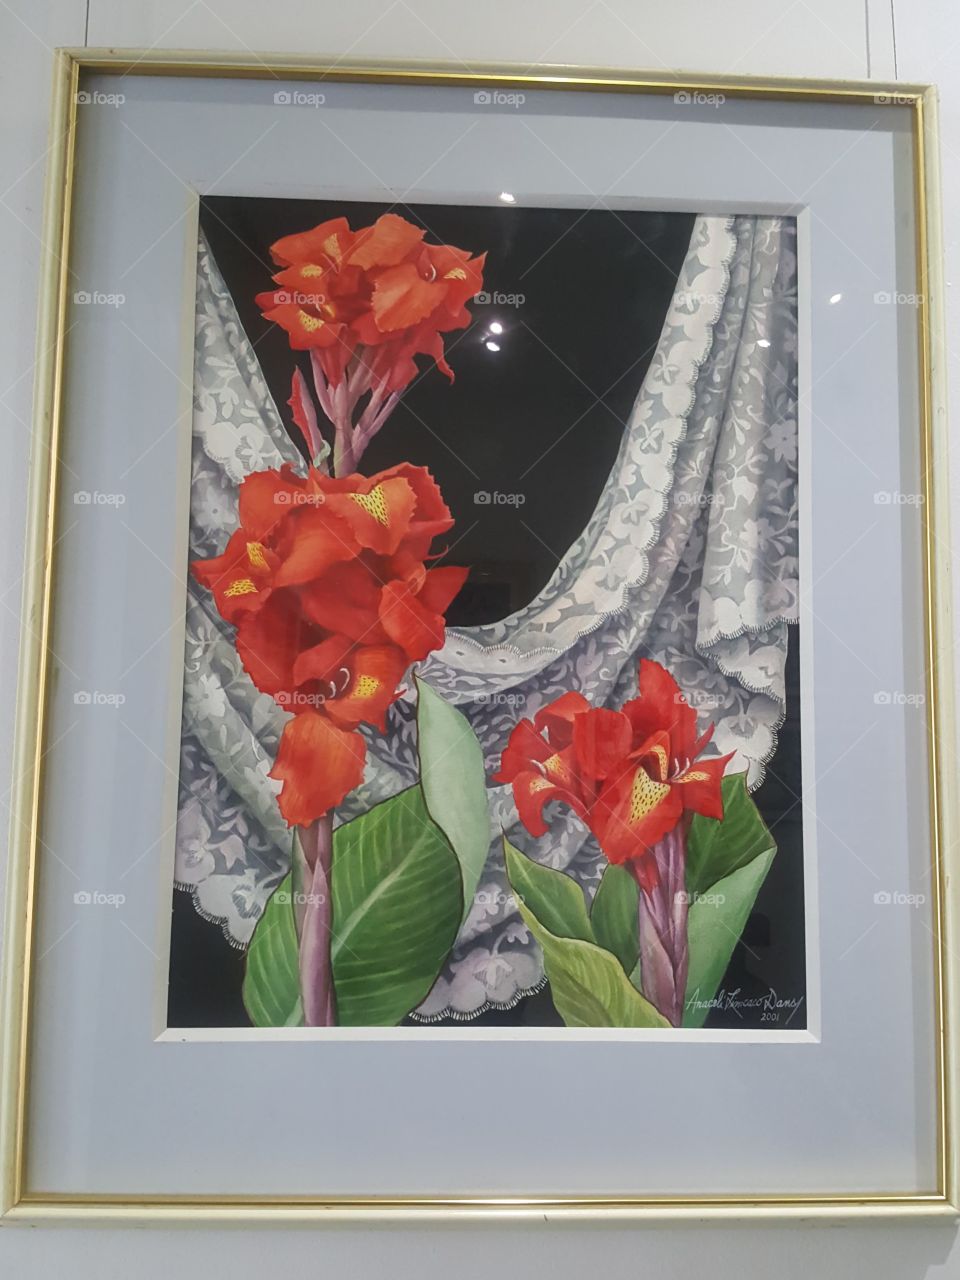 water color painting of red flowers and a place shawl